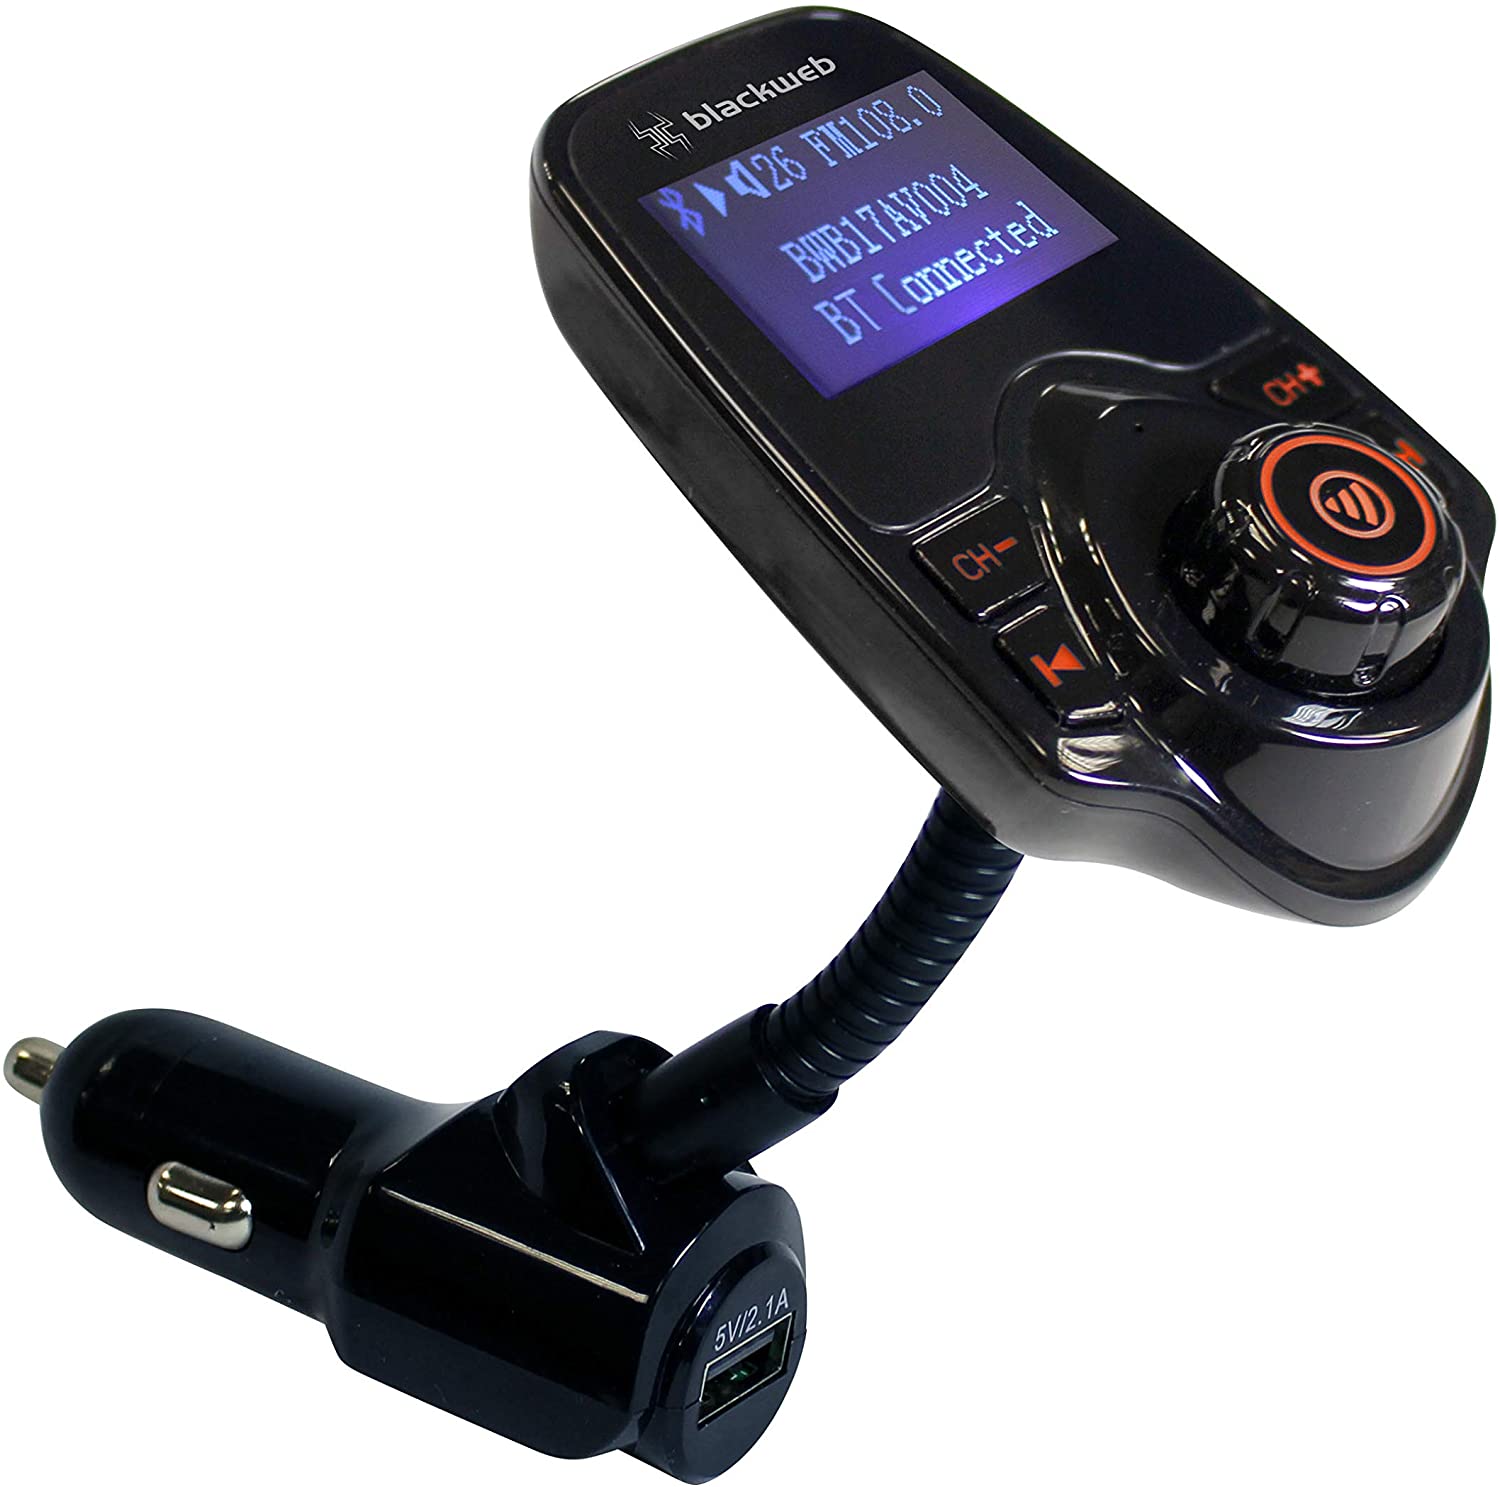 CRBLV004 FM Transmitter with Bluetooth Wireless Technology